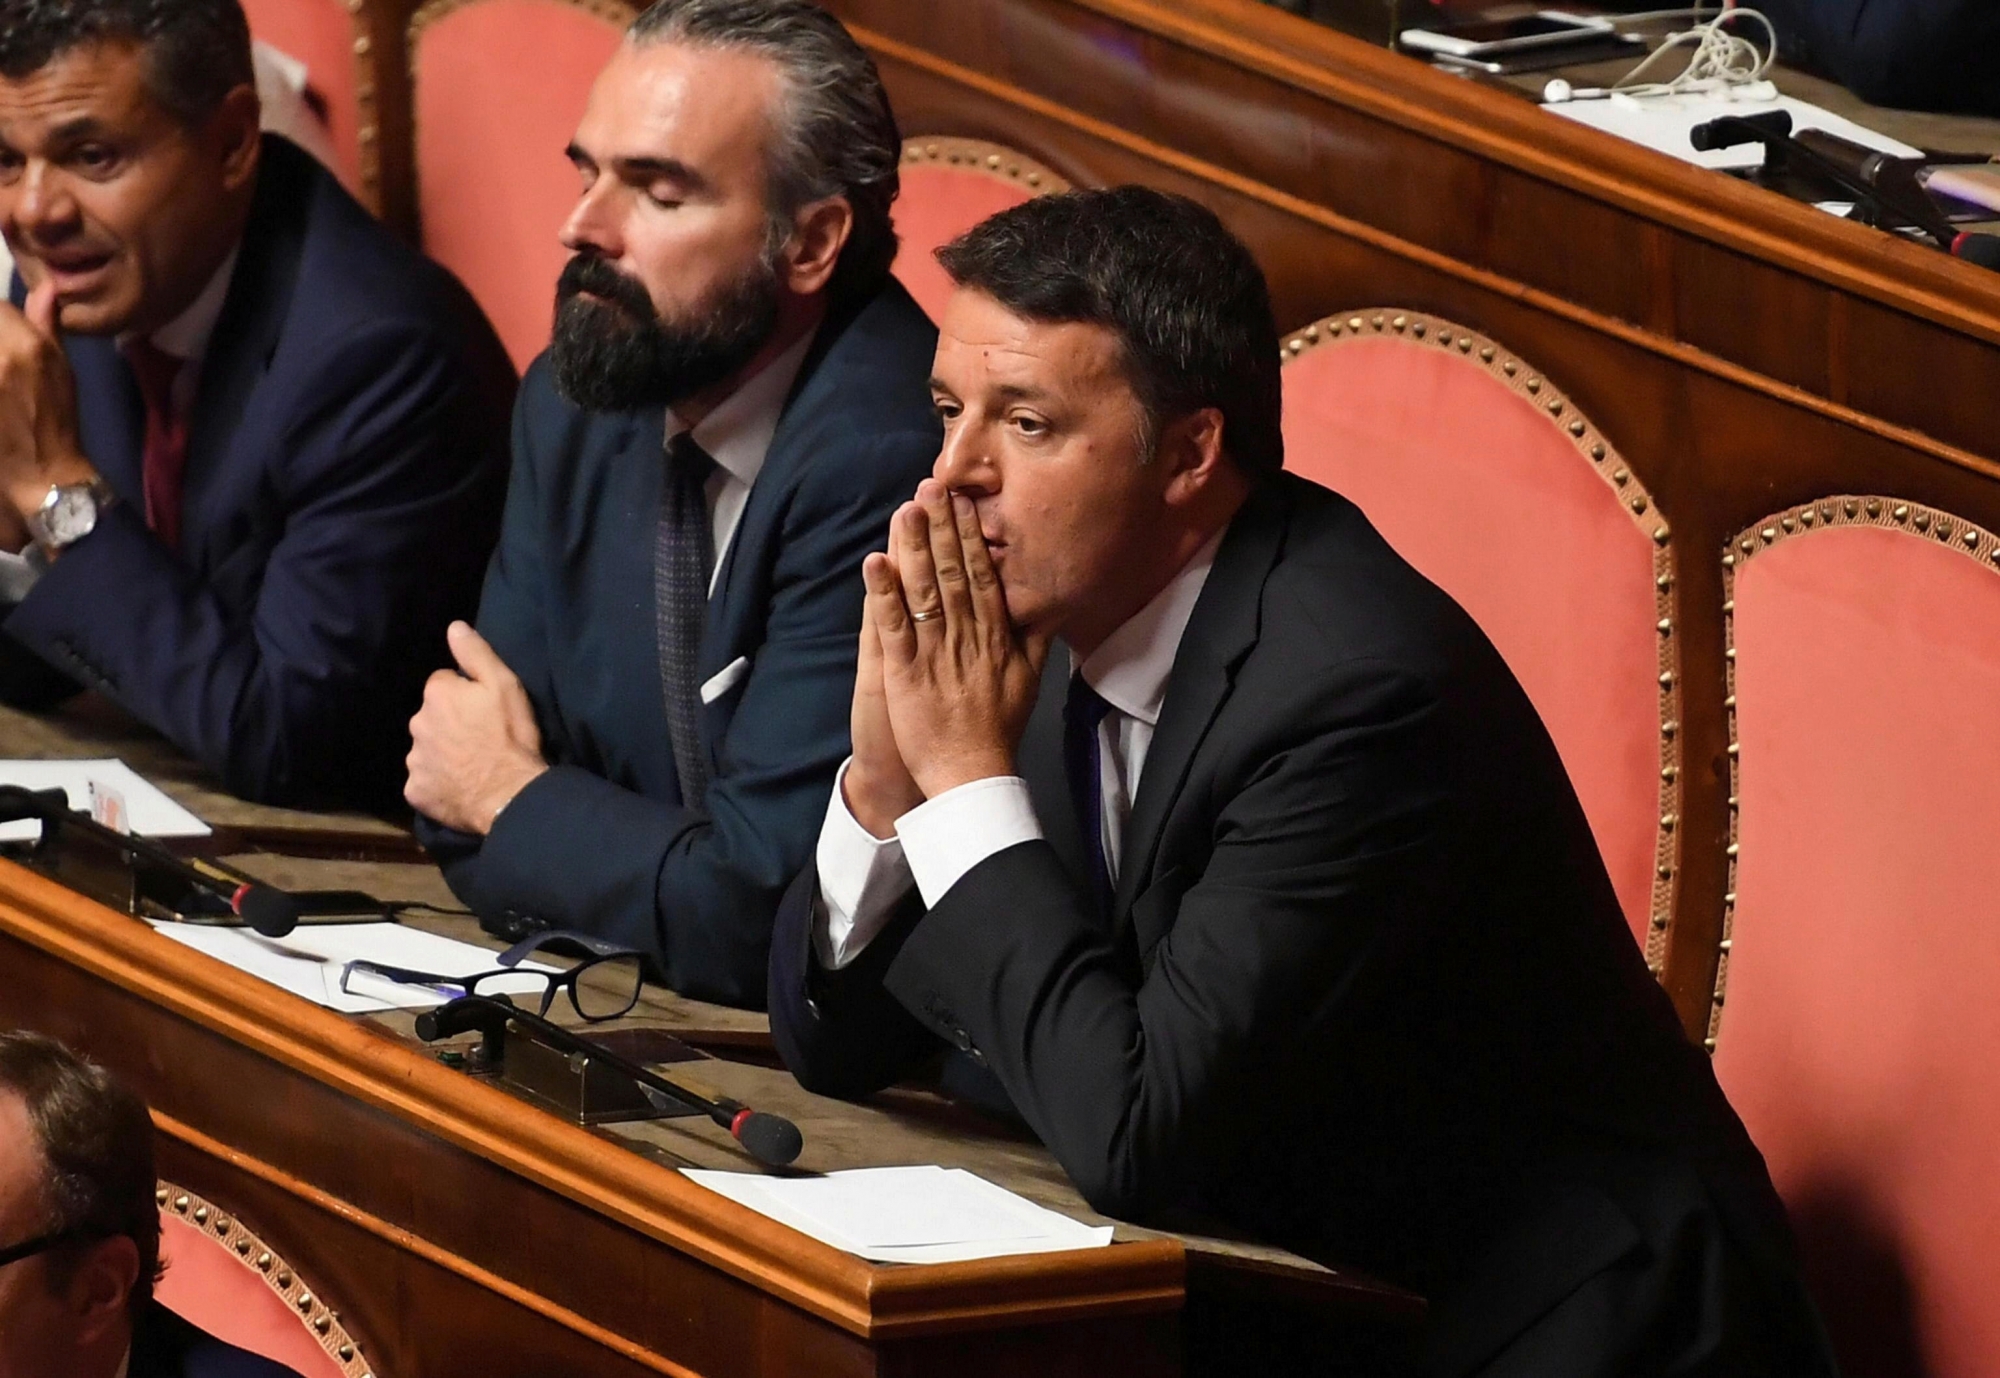 epa07832454 Pd senator Matteo Renzi (R) listens to his collegues declarations of votes in the Senate (High House) ahead of a confidence vote, in Rome, Italy, 10 September 2019. Italian Premier Conte's new government on the day faced the second of two confidence votes in parliament -- in the Senate, after passing the first one in the Lower House a day earlier. His new government is a coalition between the anti-establishment 5-Star Movement (M5S) and the center-left Democratic Party (PD).  EPA/MAURIZIO BRAMBATTI La Liberté